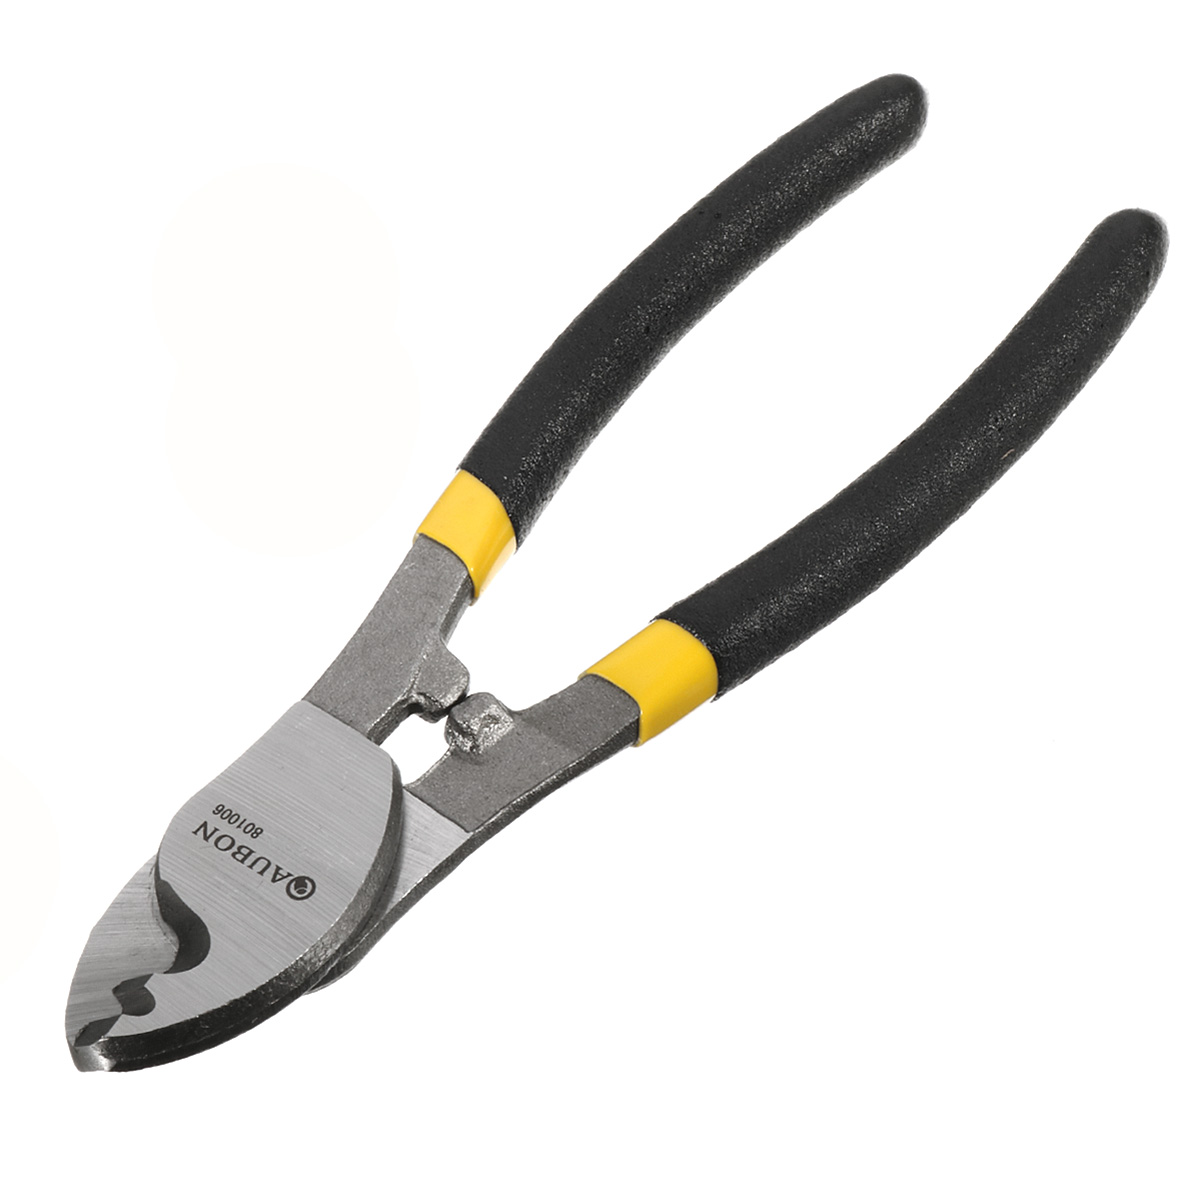 Heavy-Duty-Carbon-Steel-6inch8inch10inch-Cable-Wire-Cutter-Strippers-Cutters-Tool-1154501